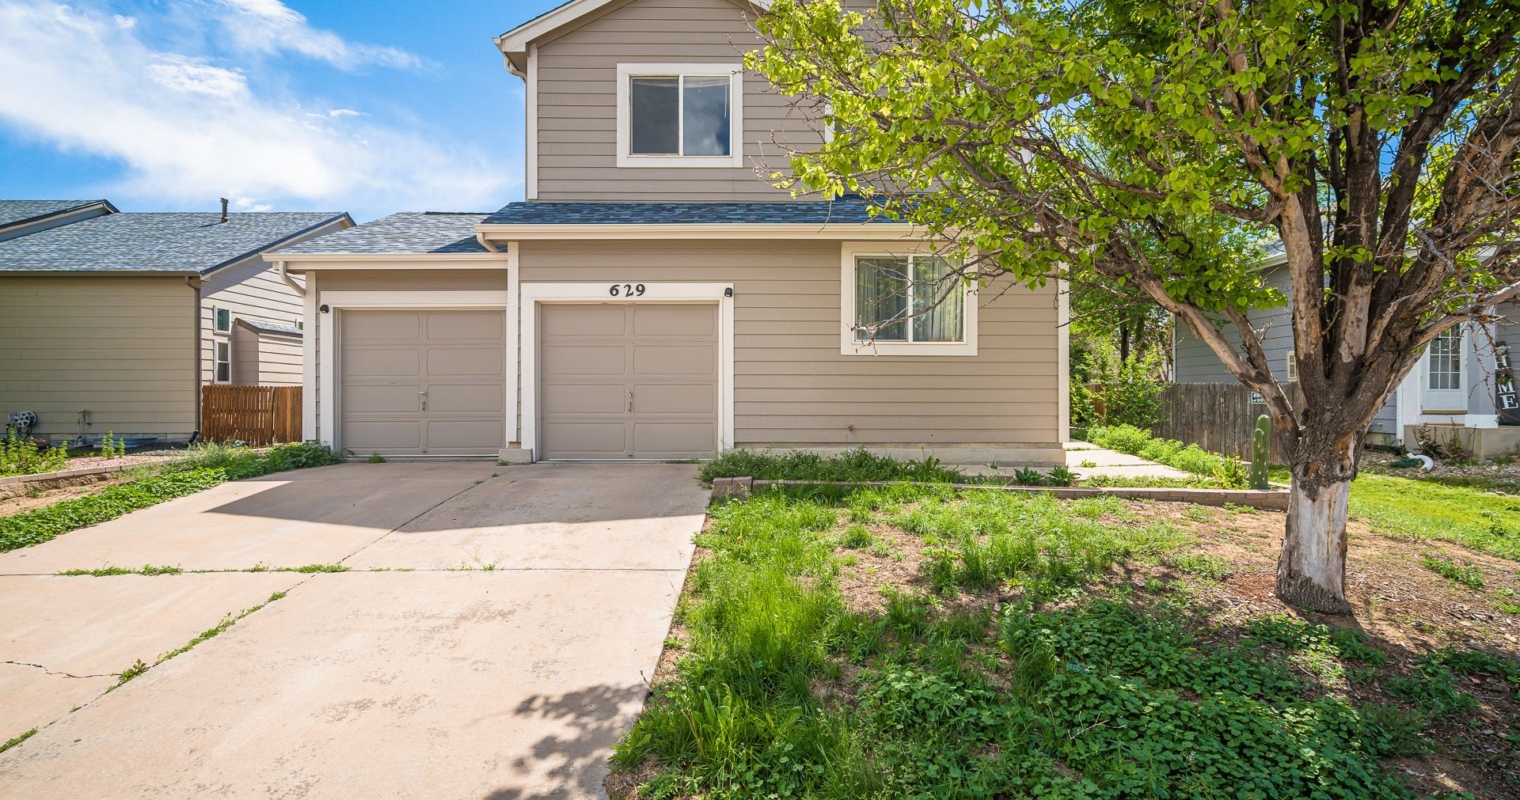 2-Story Home Minutes to Fort Carson